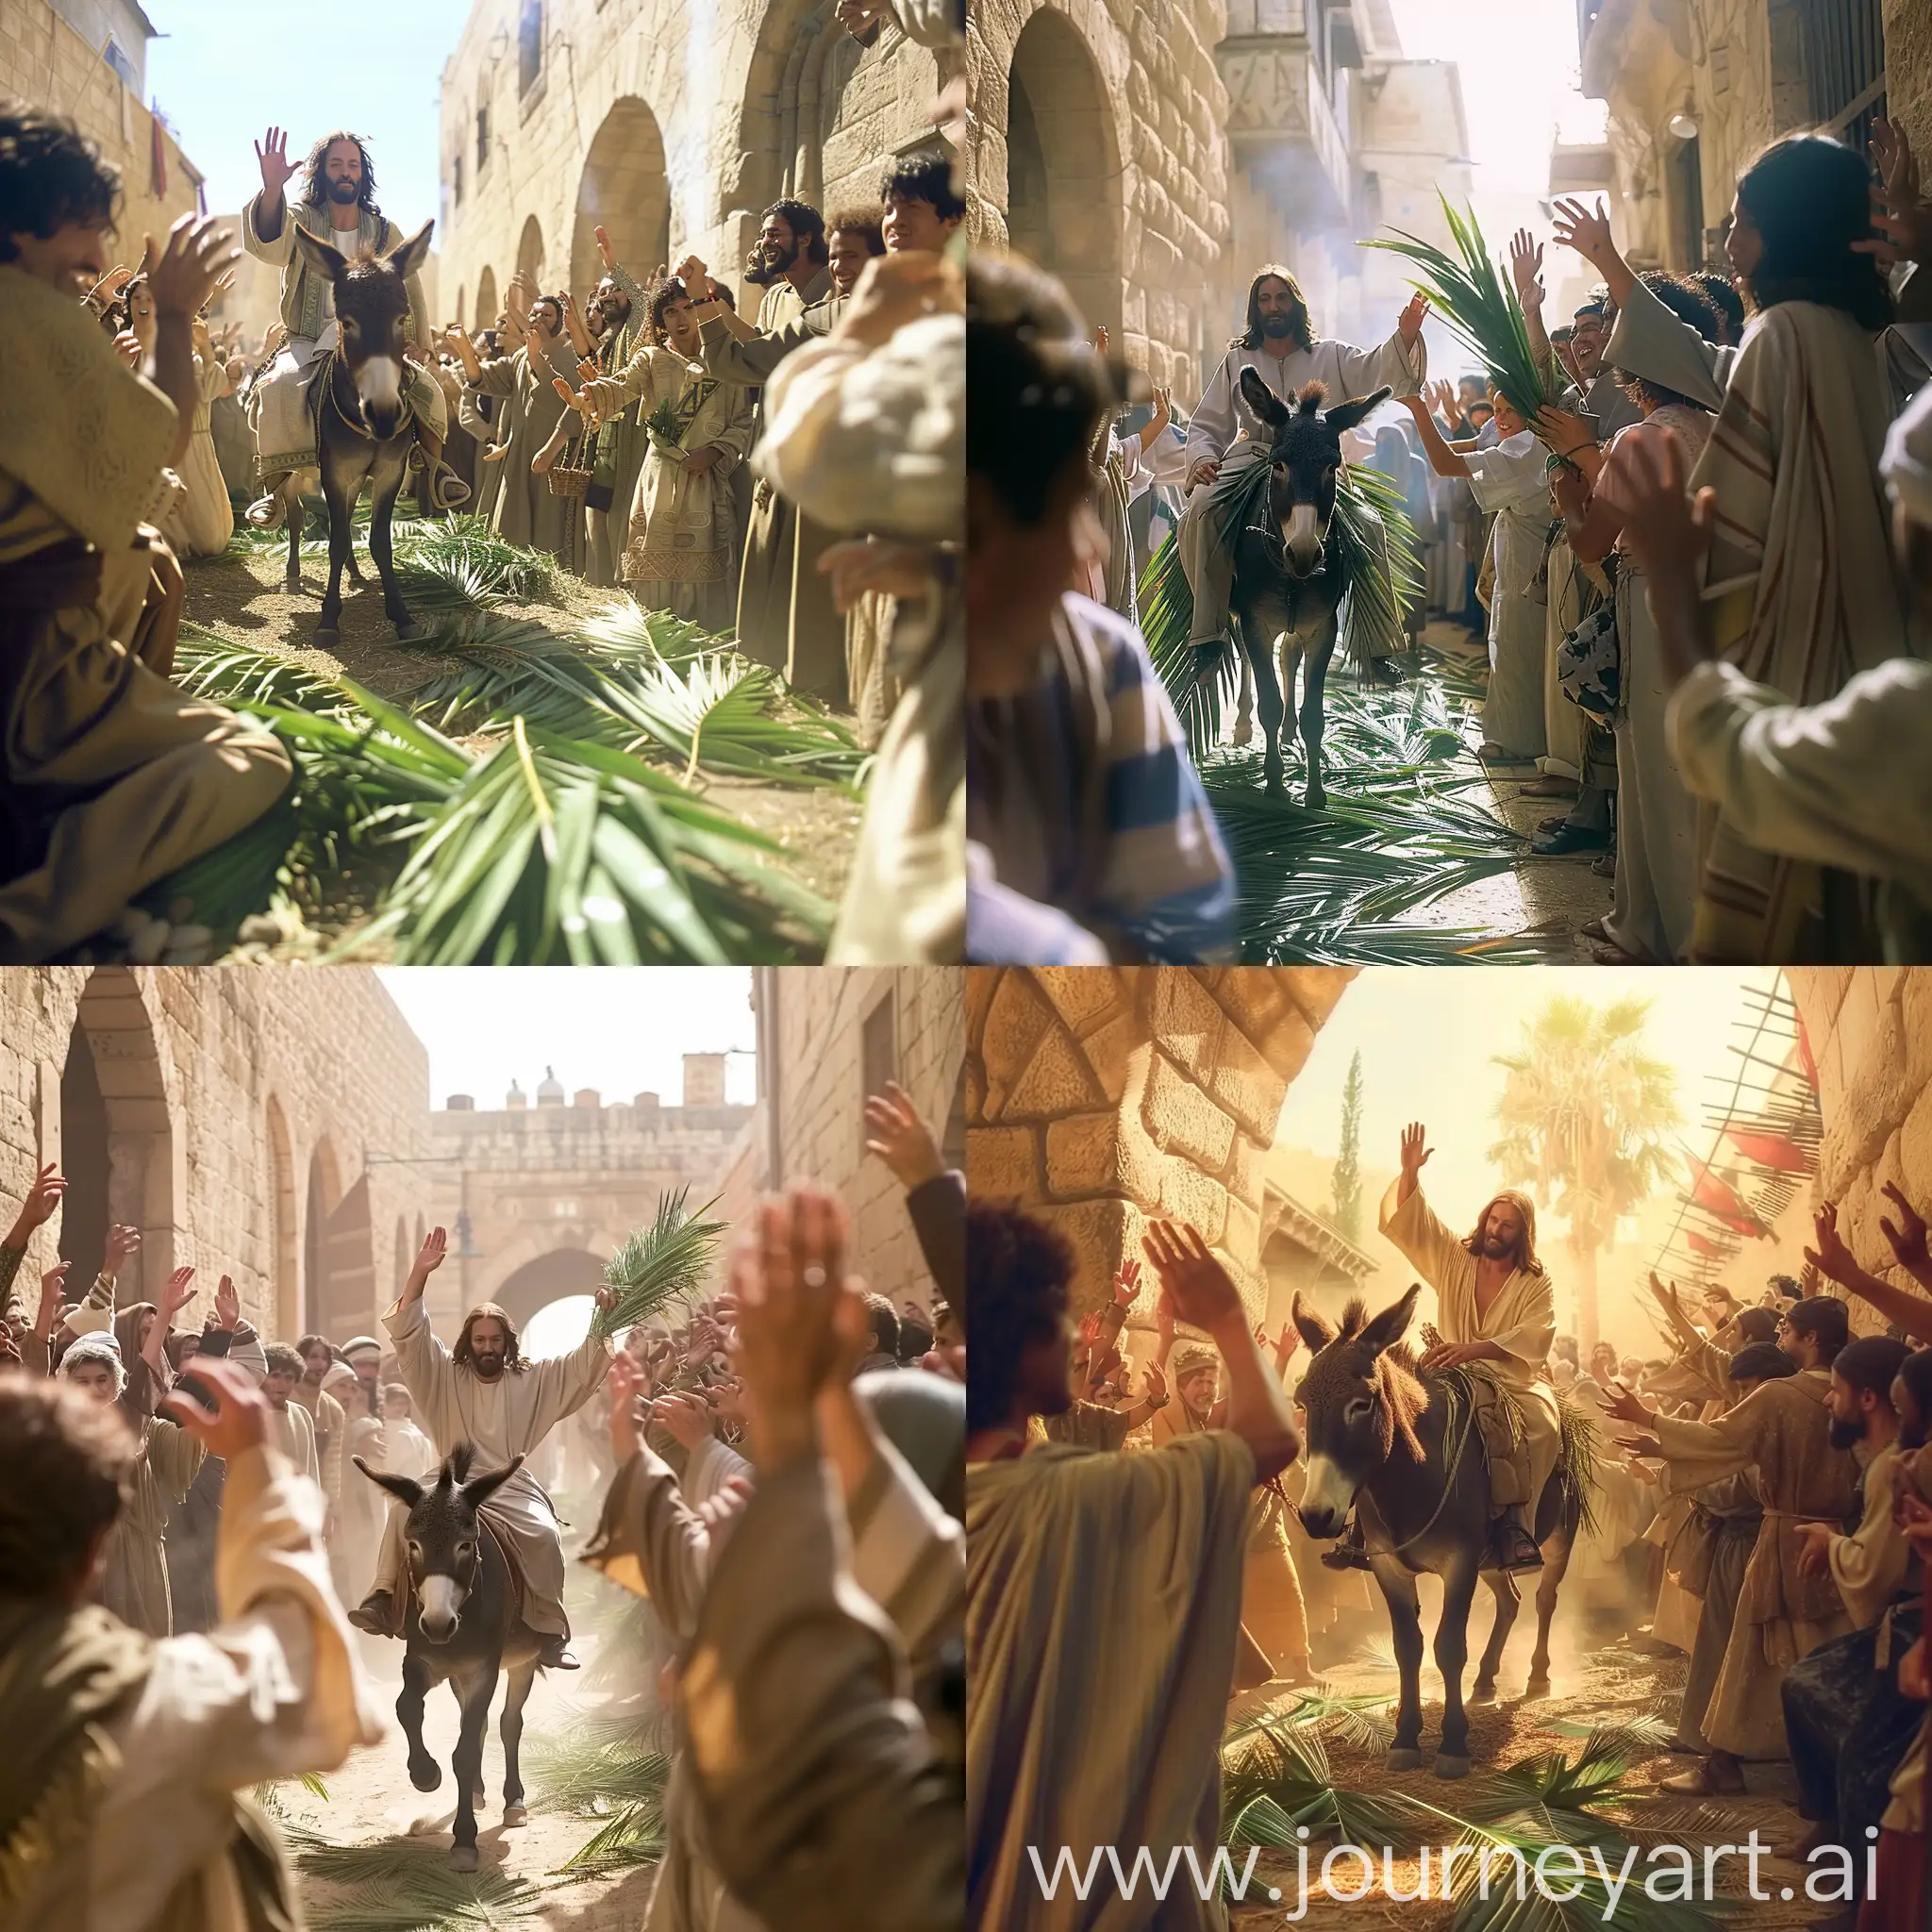 Jesus-Triumphal-Entry-on-Donkey-with-Welcoming-Crowds-and-Palm-Leaves